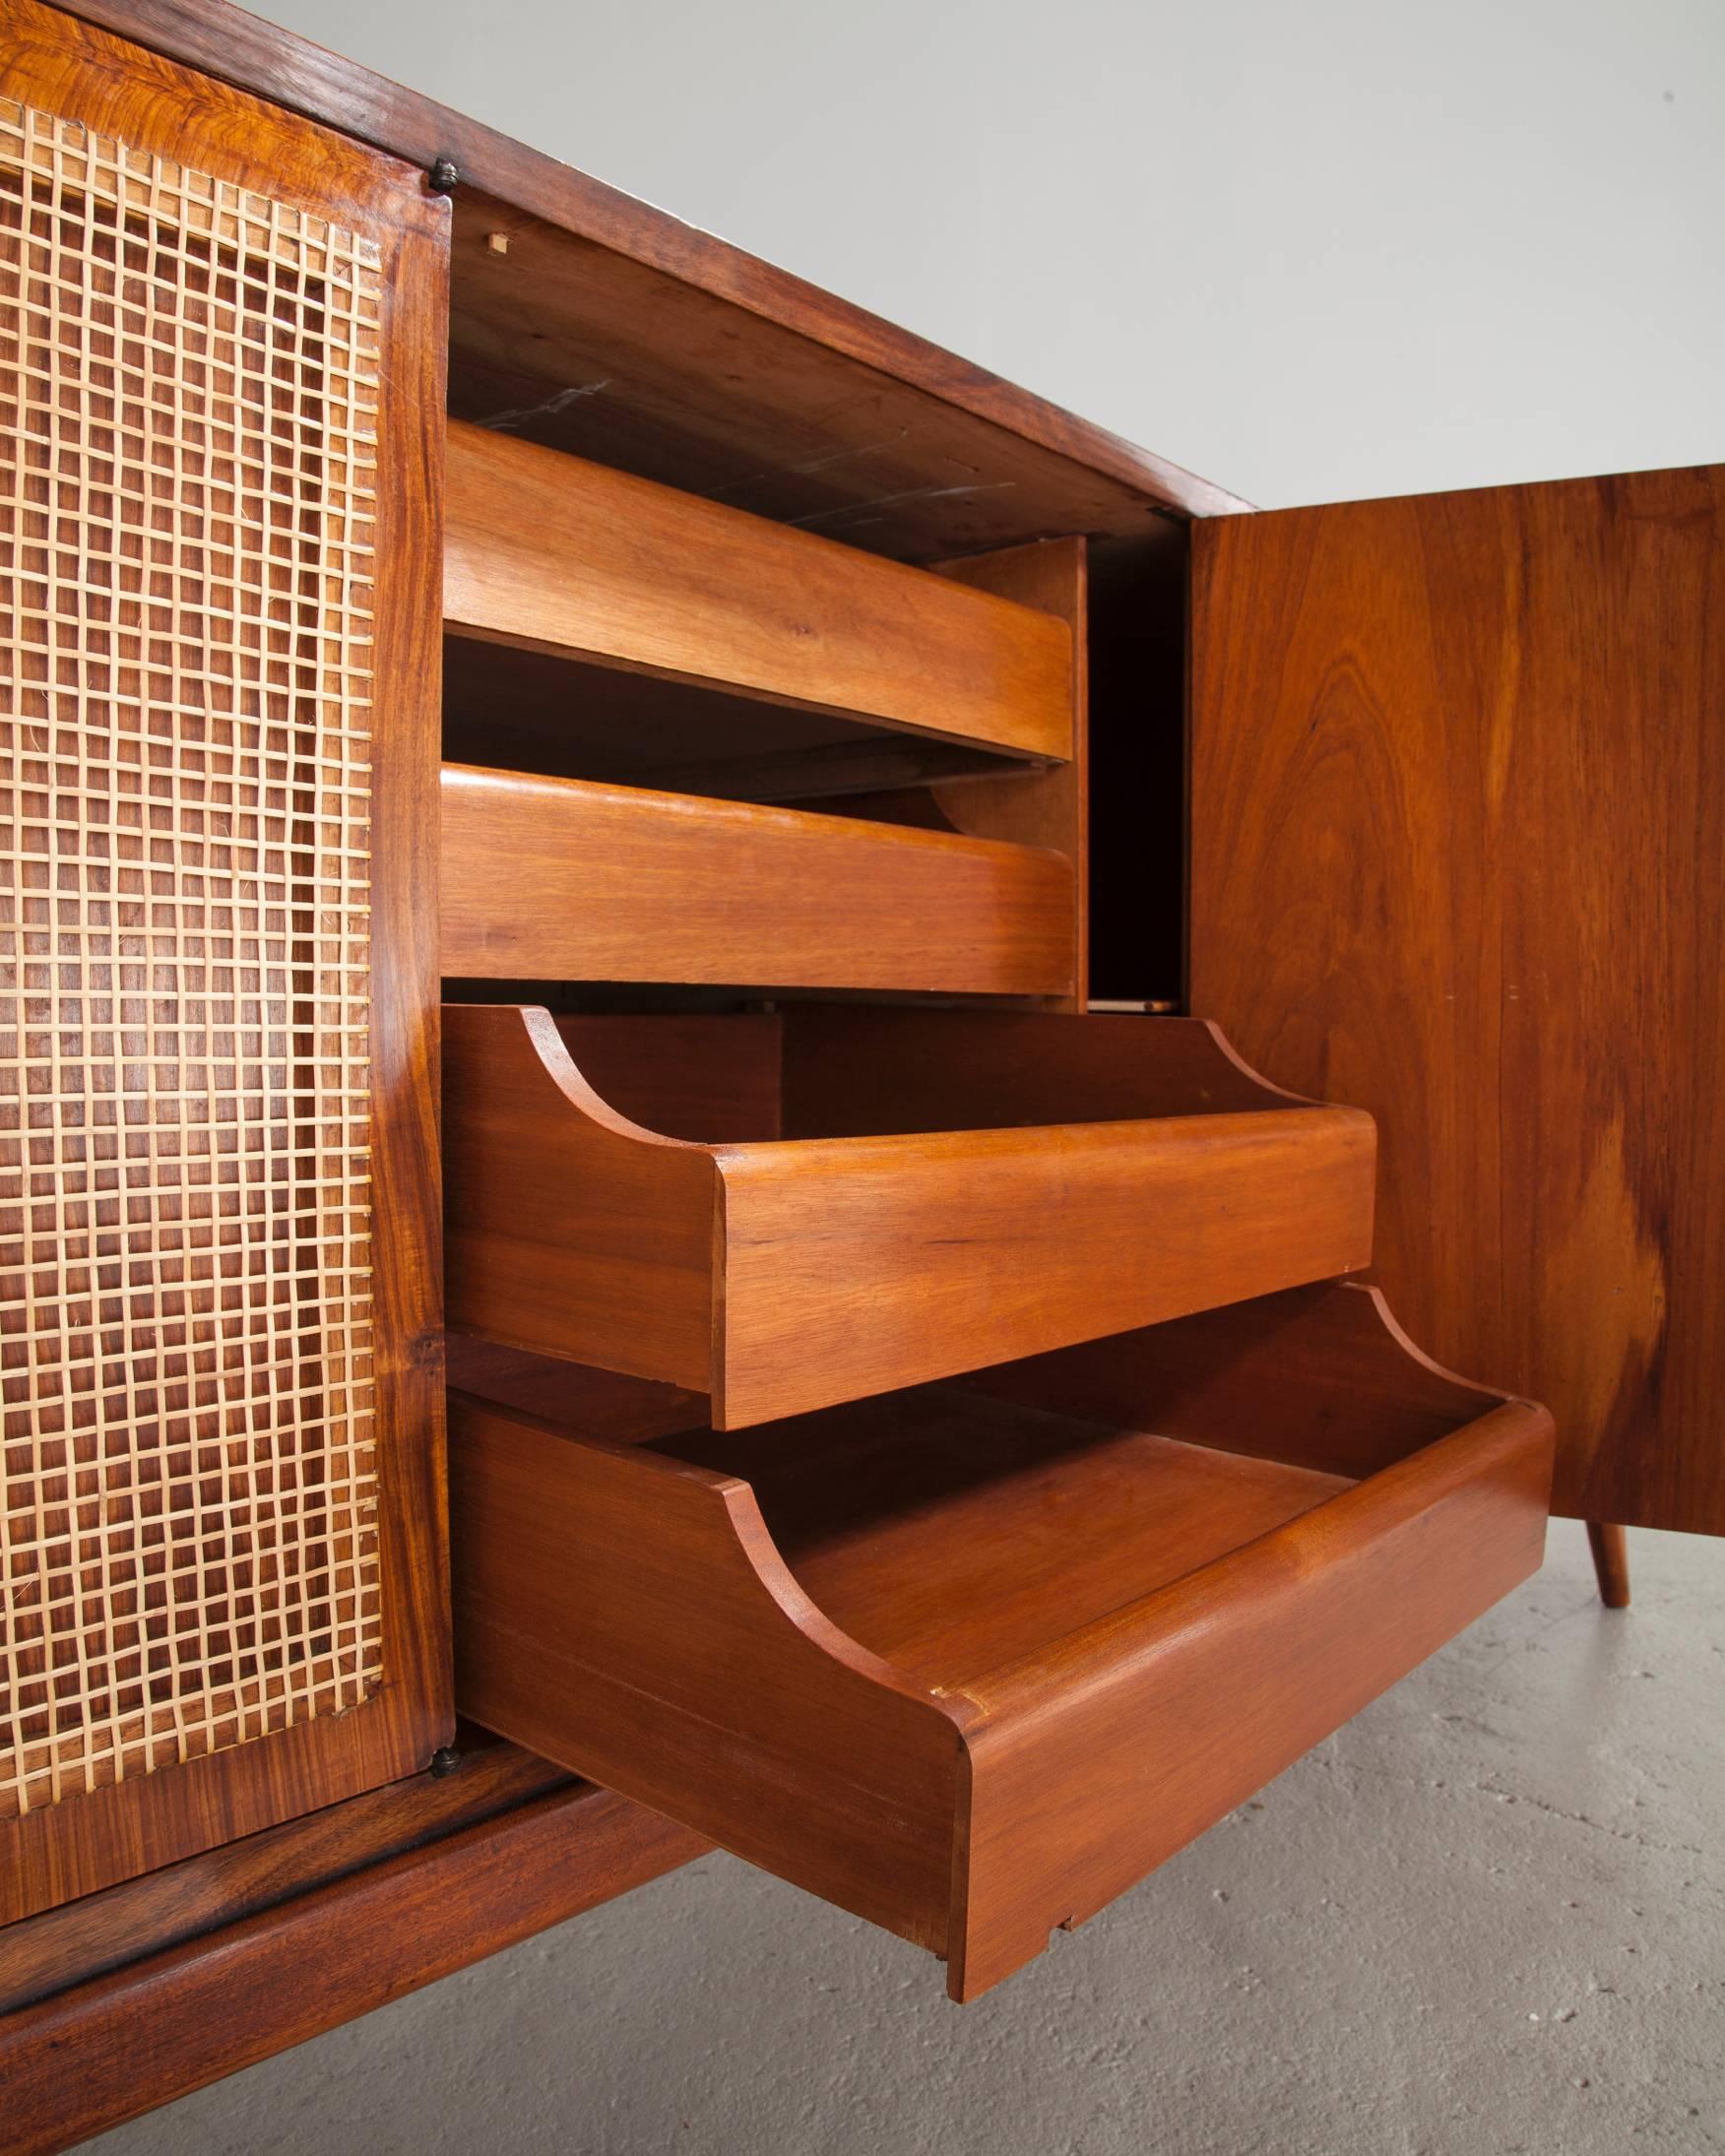 Mid-20th Century Credenza in Caviona Wood with a Cane Front by Martin Eisler, Brazil, 1950s